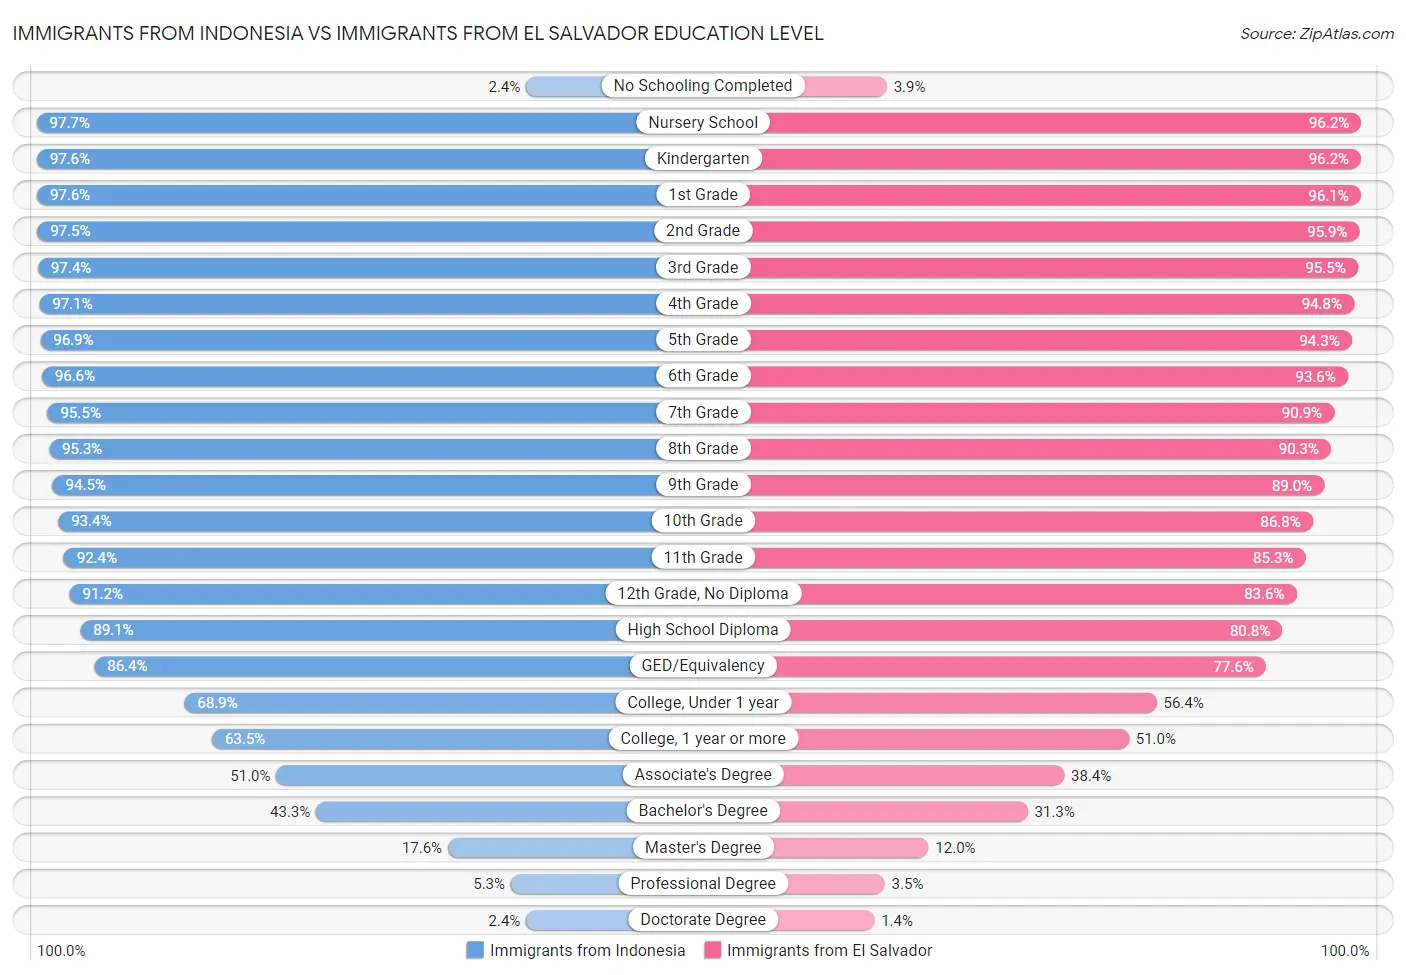 Immigrants from Indonesia vs Immigrants from El Salvador Education Level